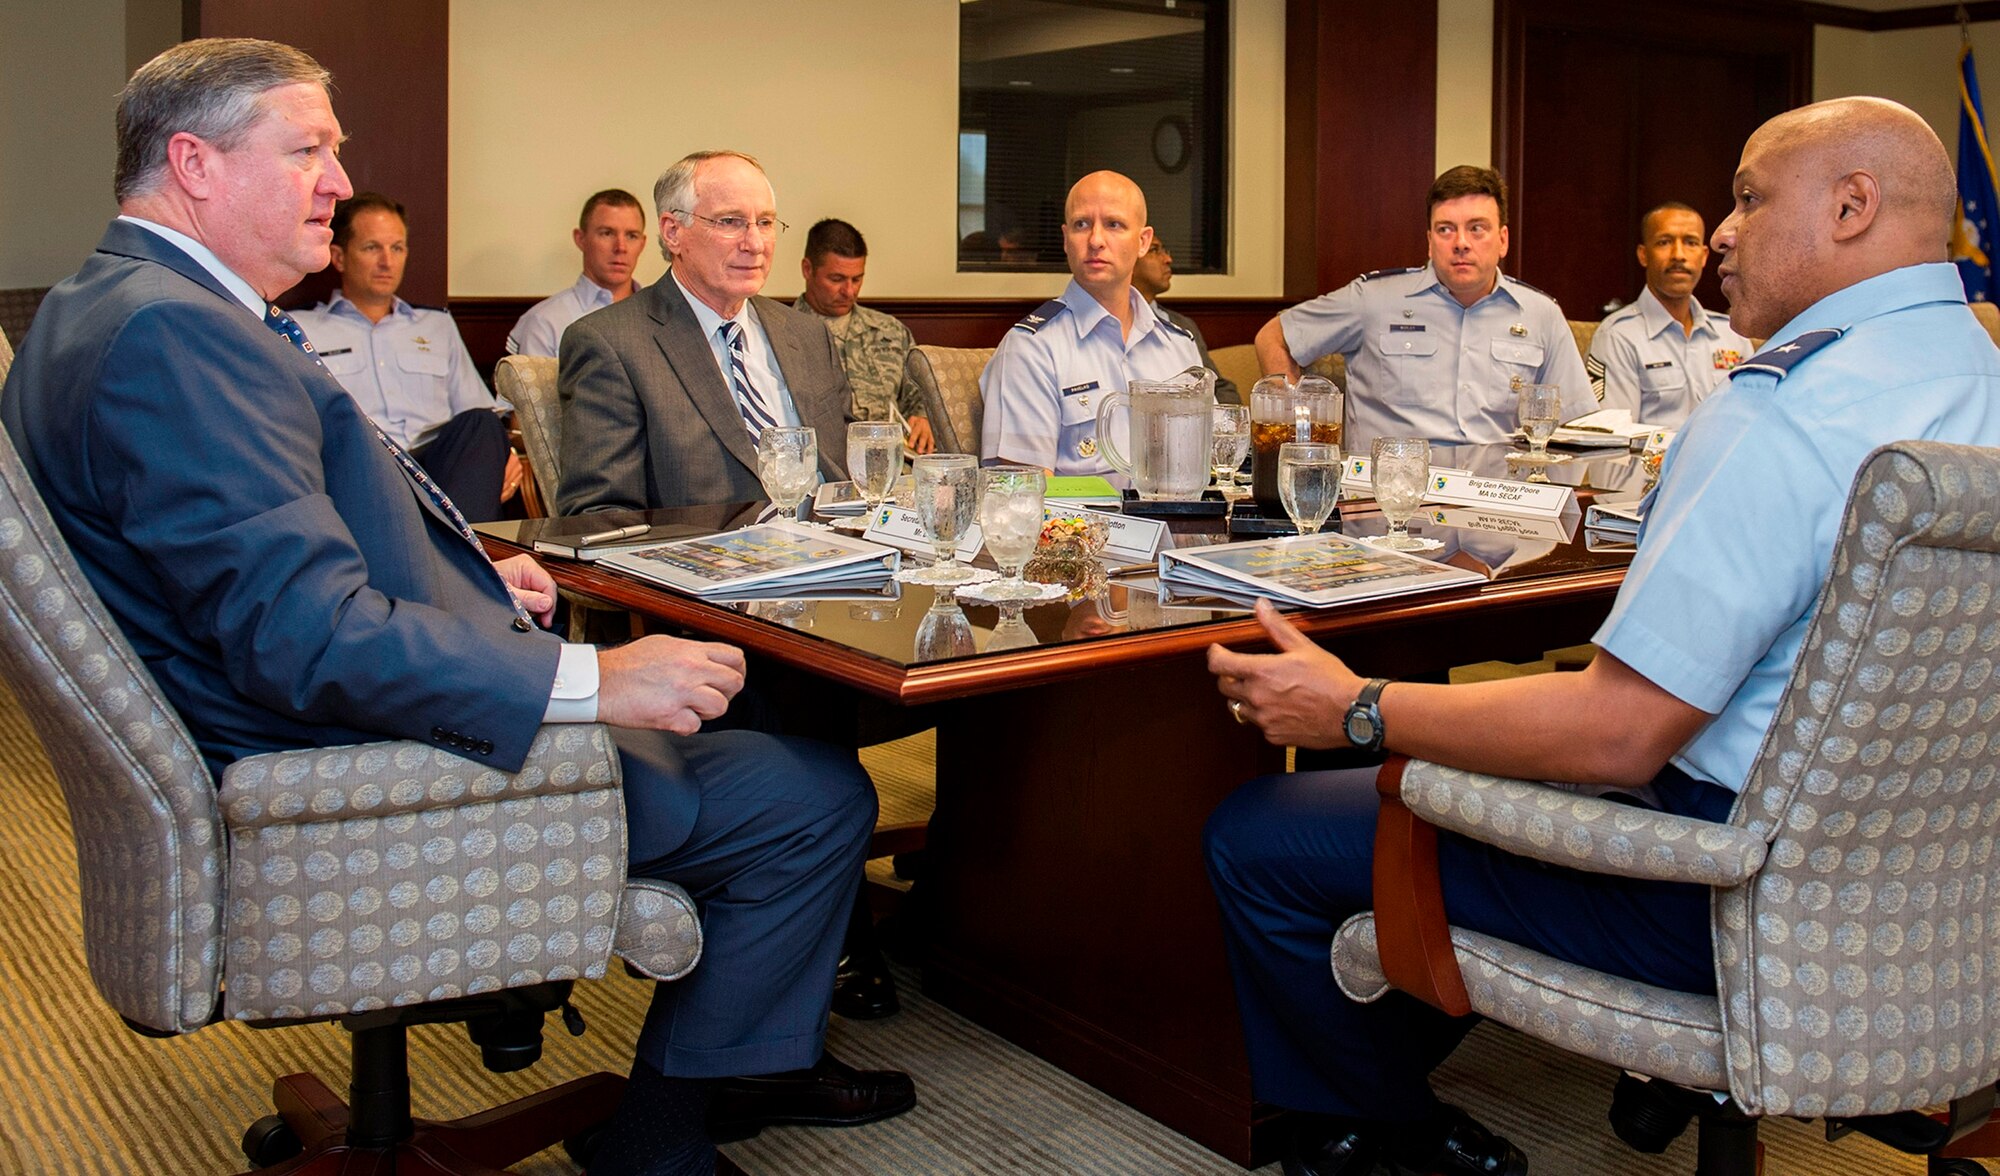 Secretary of the Air Force Michael Donley (left) receives a briefing from Brig. Gen. Anthony Cotton, 45th Space Wing commander, (far right) during his tour of the wing Feb. 21. In addition to meeting with wing leadership, Donley had lunch with wing award winners, toured various locations around the base and held an “Airman’s call” to discuss the latest challenges affecting the service. (U.S. Air Force Photo/Matthew Jurgens)